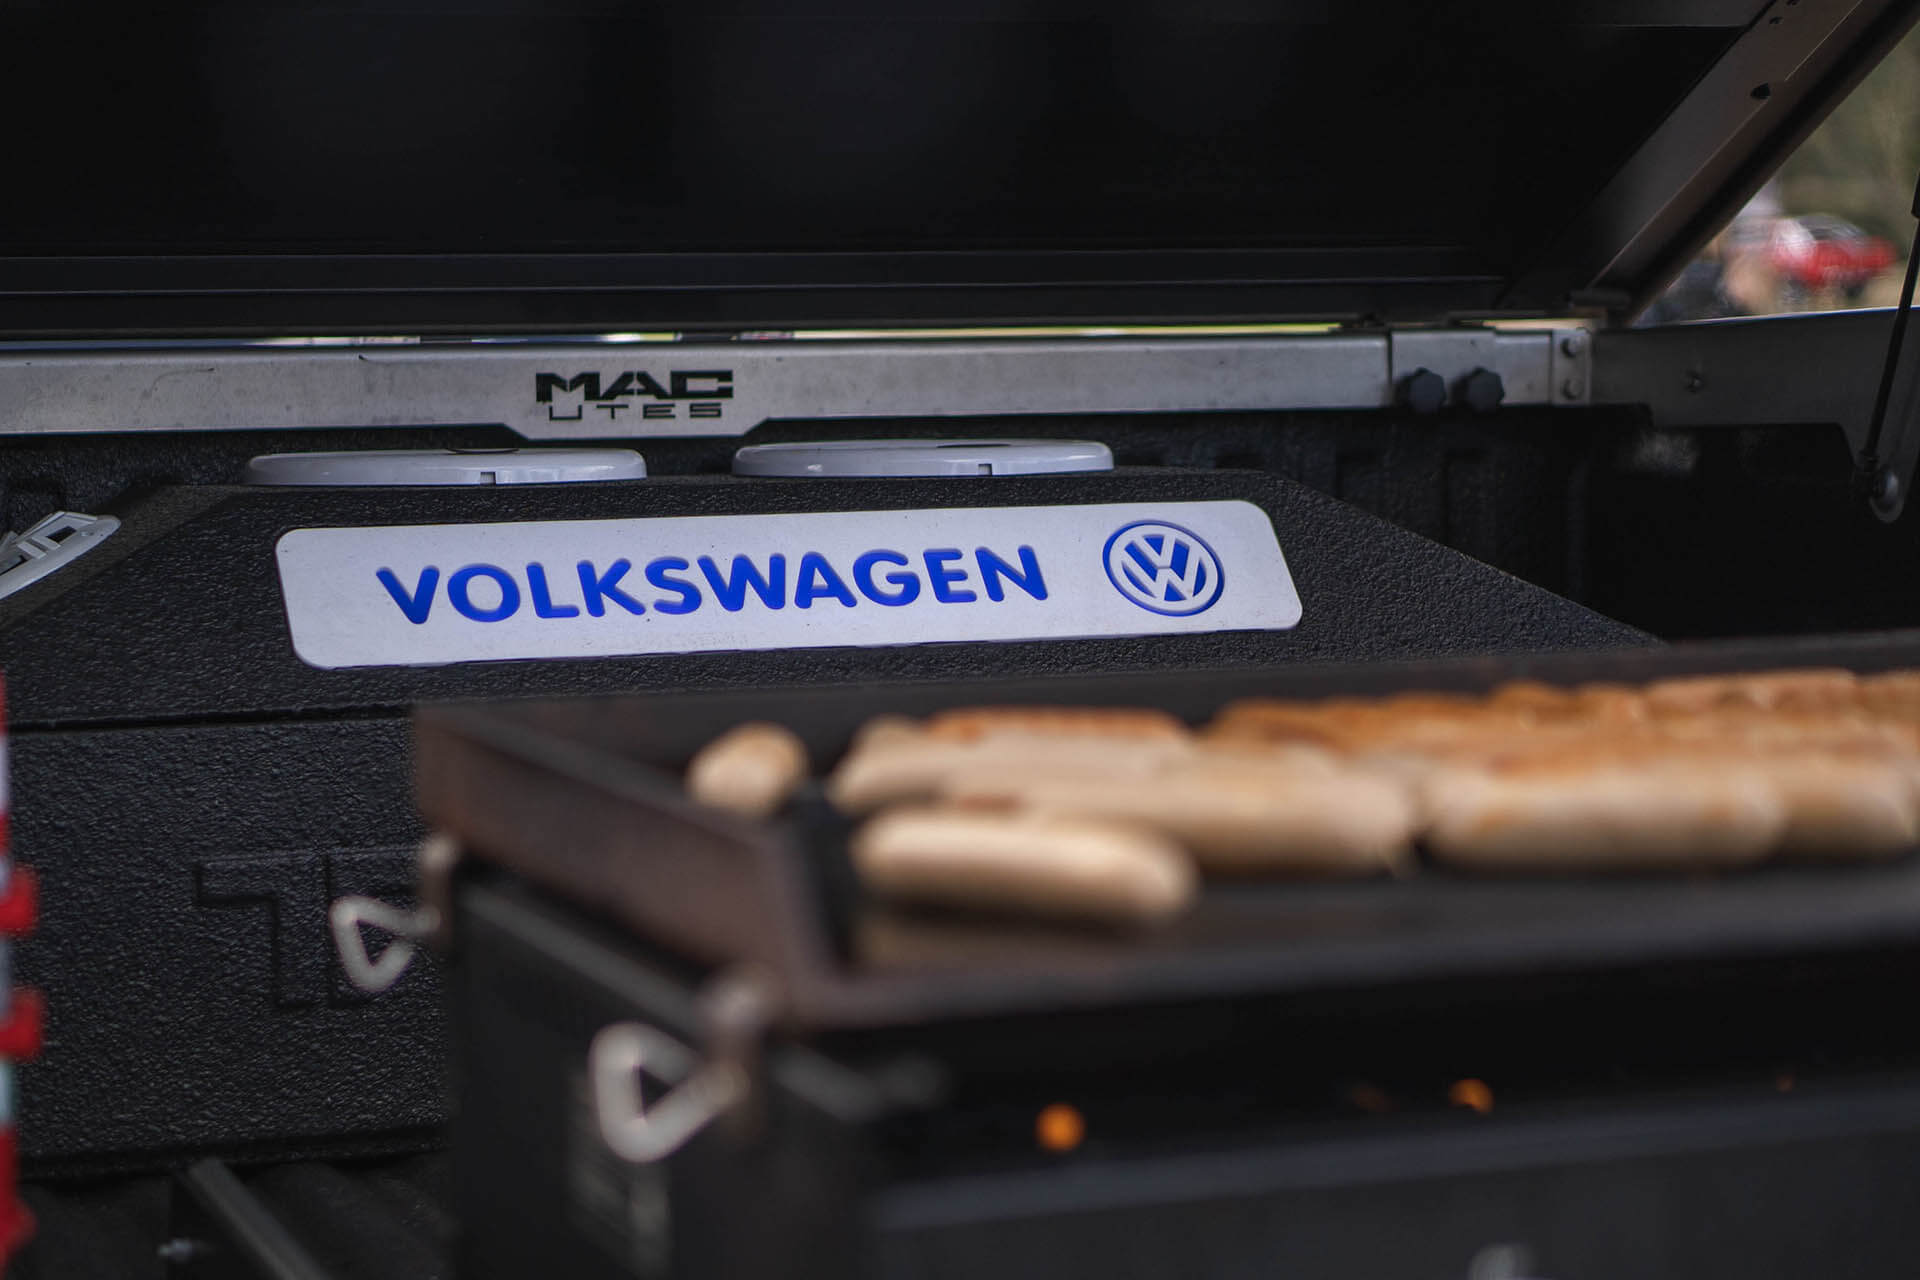 Our technicians work tirelessly in the Ebbet Volkswagen workshop to ensure our customer's vehicles continue to run the way they should. We cracked out the Amarok BBQ to keep our hard-working team fueled, and have a few laughs too!